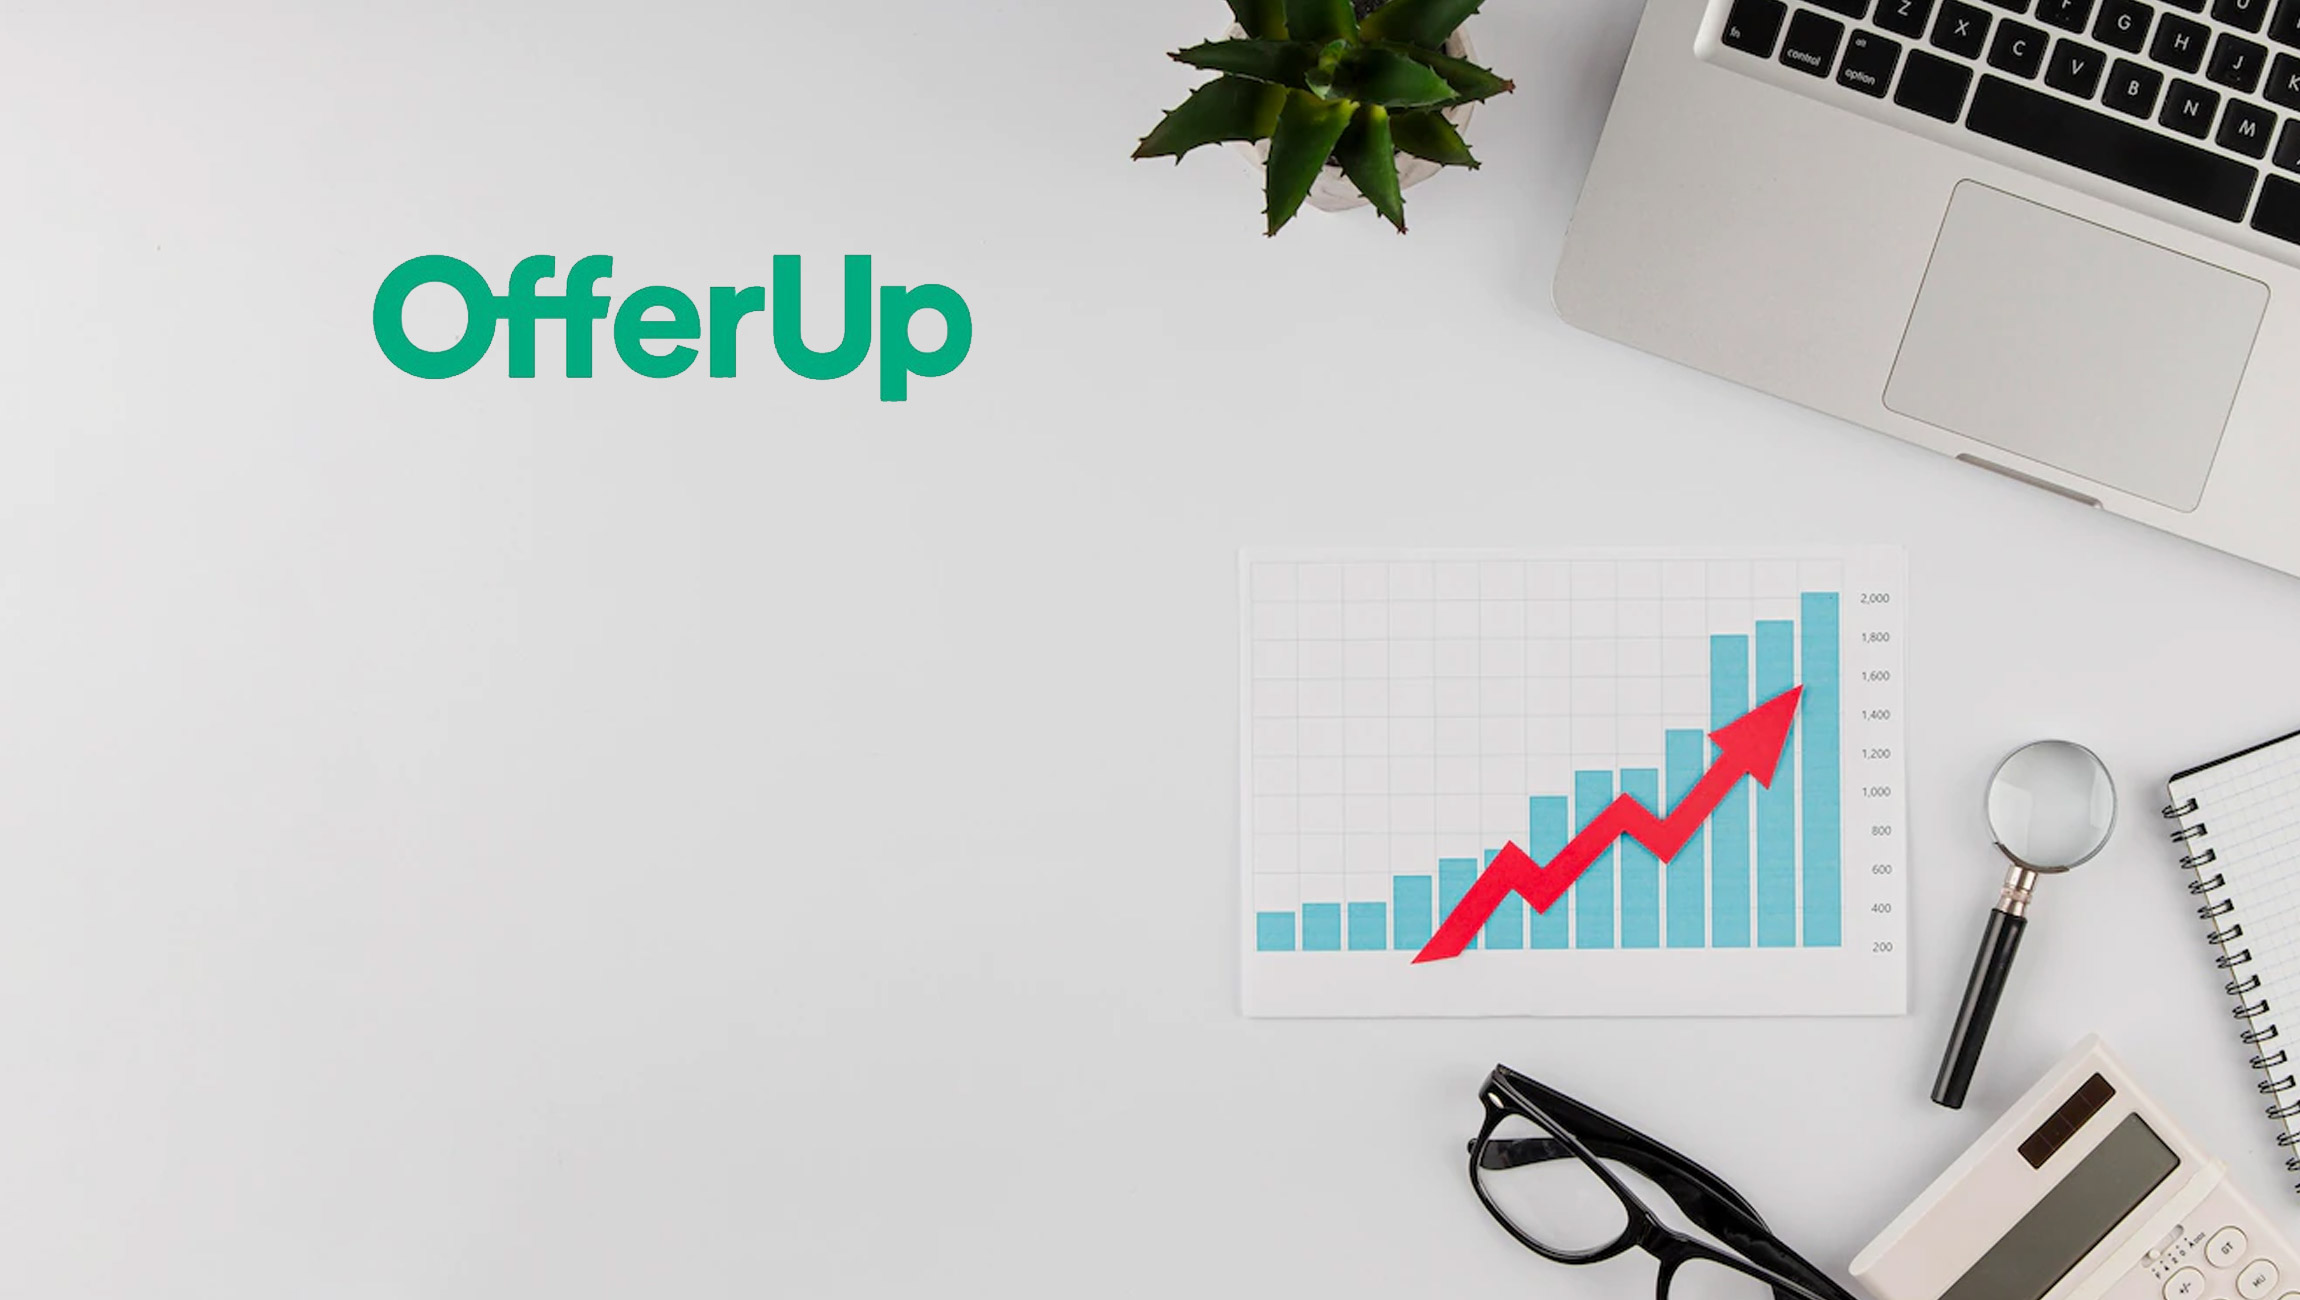 OfferUp's 2022 Recommerce Report Reveals Record-Breaking Growth In U.S. Recommerce Amid Increasing Inflation and Recession Fears